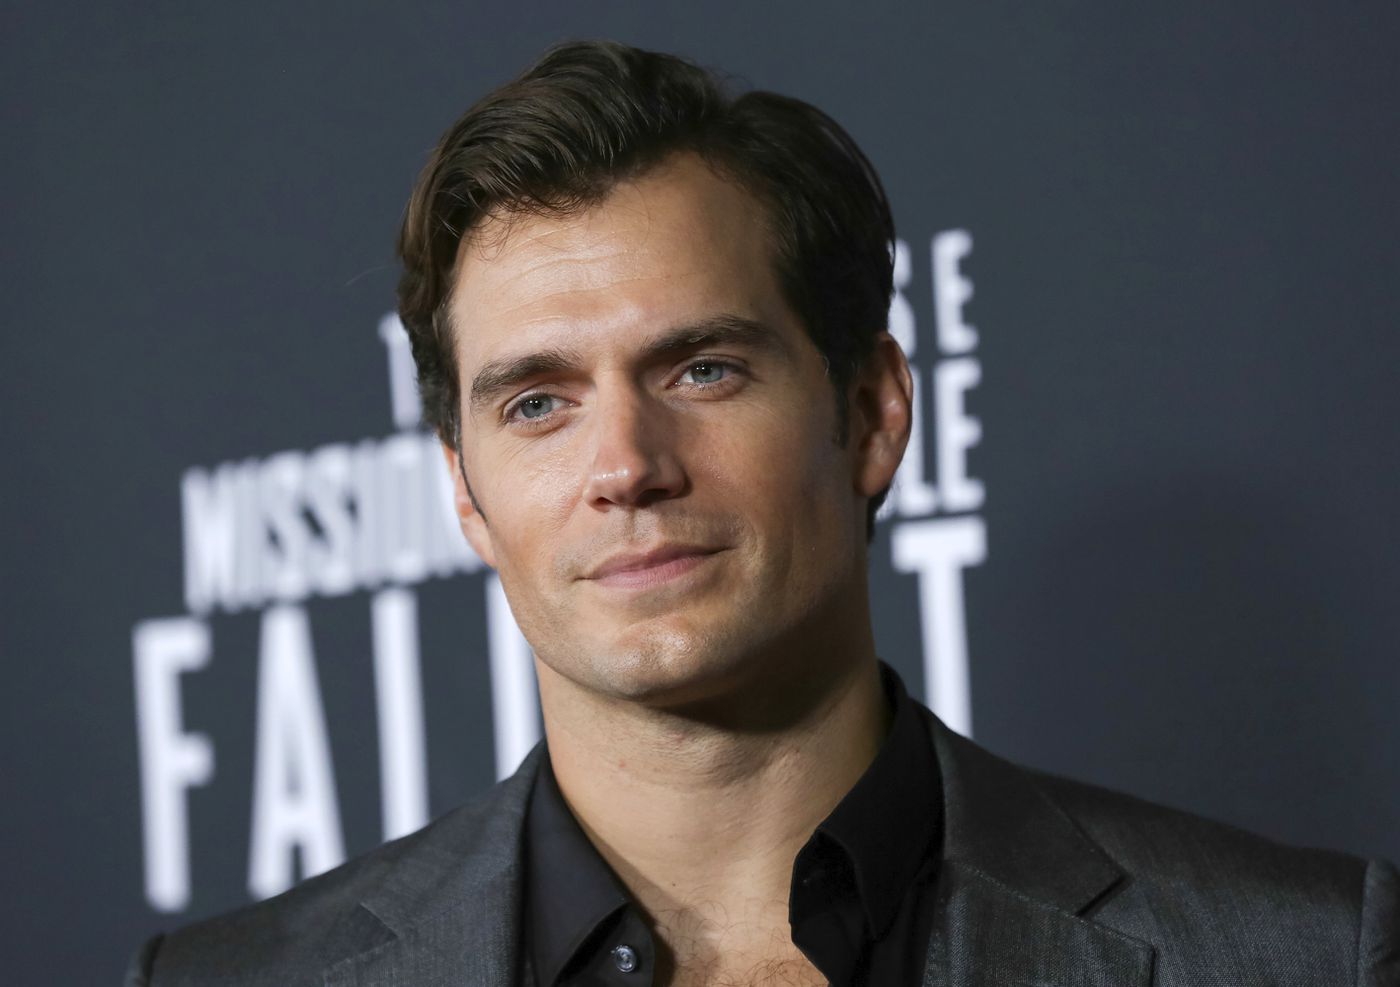 British actor best known for his portrayal of DC Comics character Superman in the DC Extended Universe